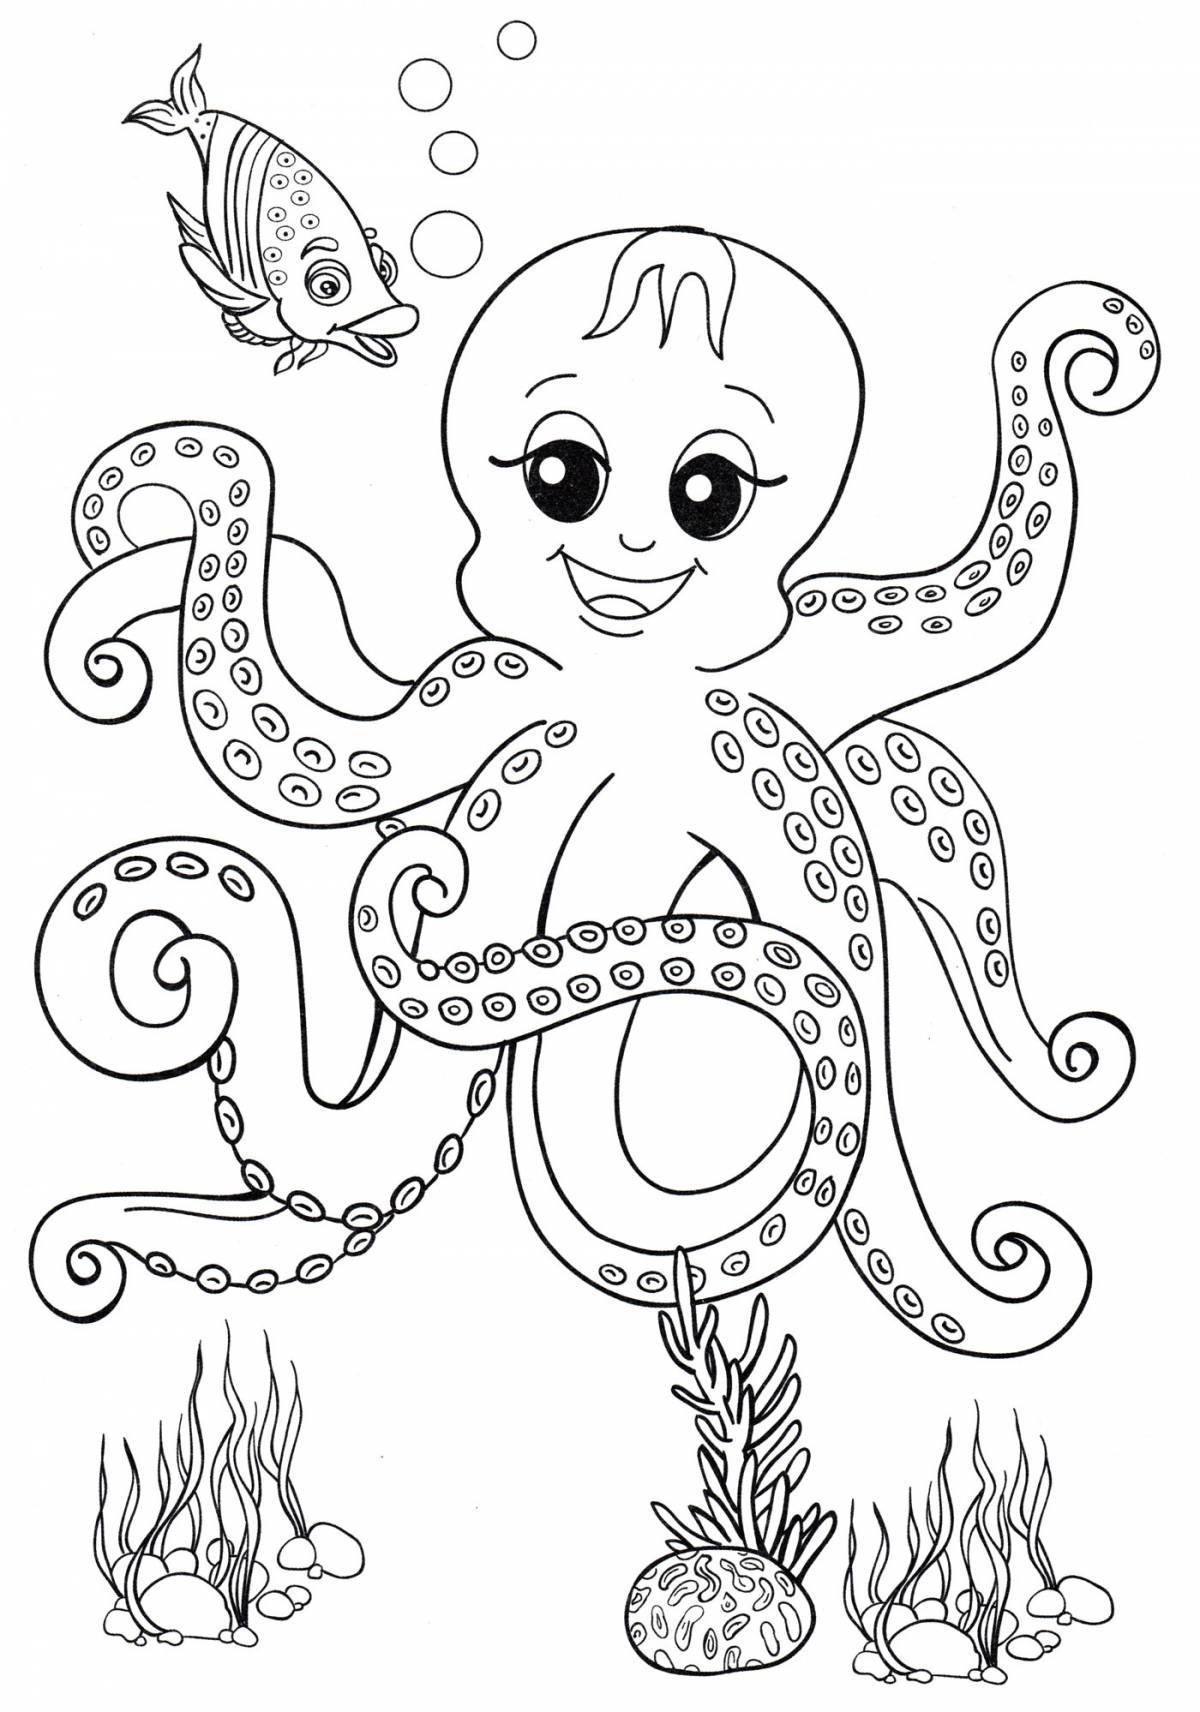 Bright coloring octopus for kids